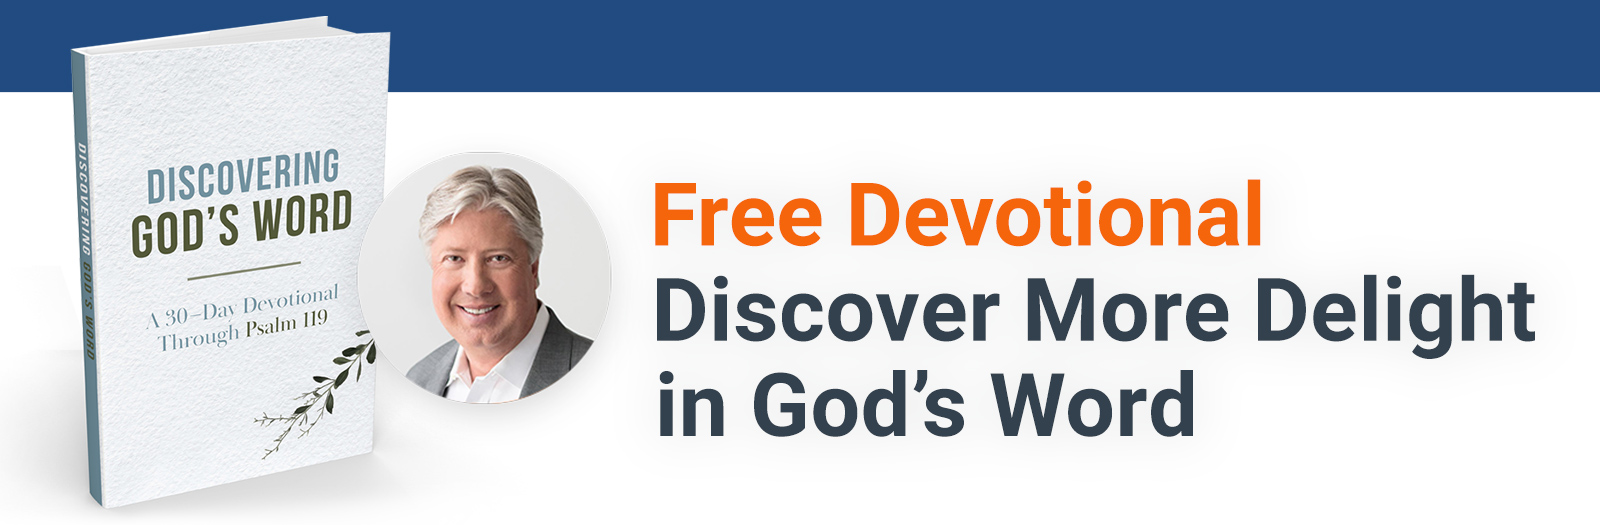 Free Devotional - Discover More Delight in God's Word